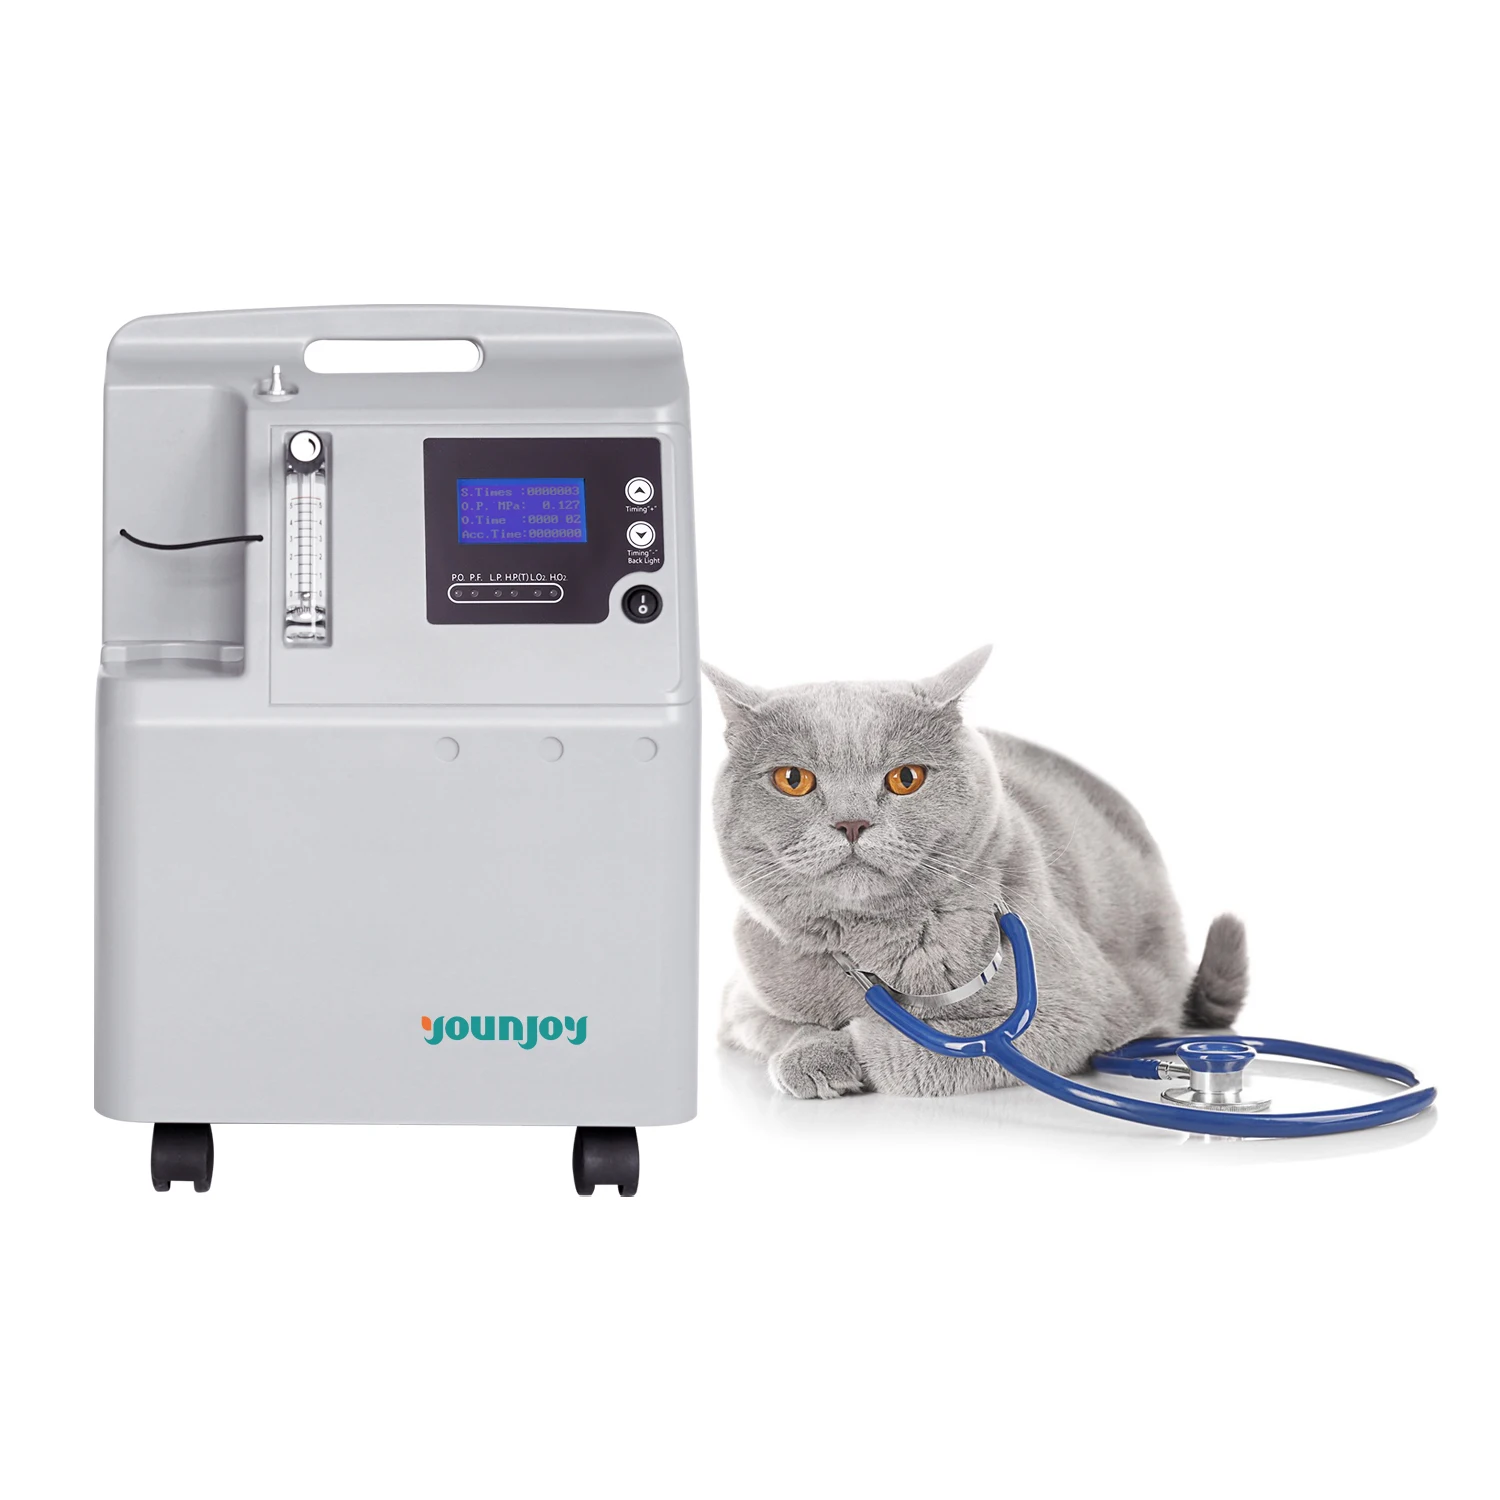 

High Quality Veterinary Equipment Medical Hospital Anesthesia Machine Oxygen Concentrator 5L for Animal Pet Surgery